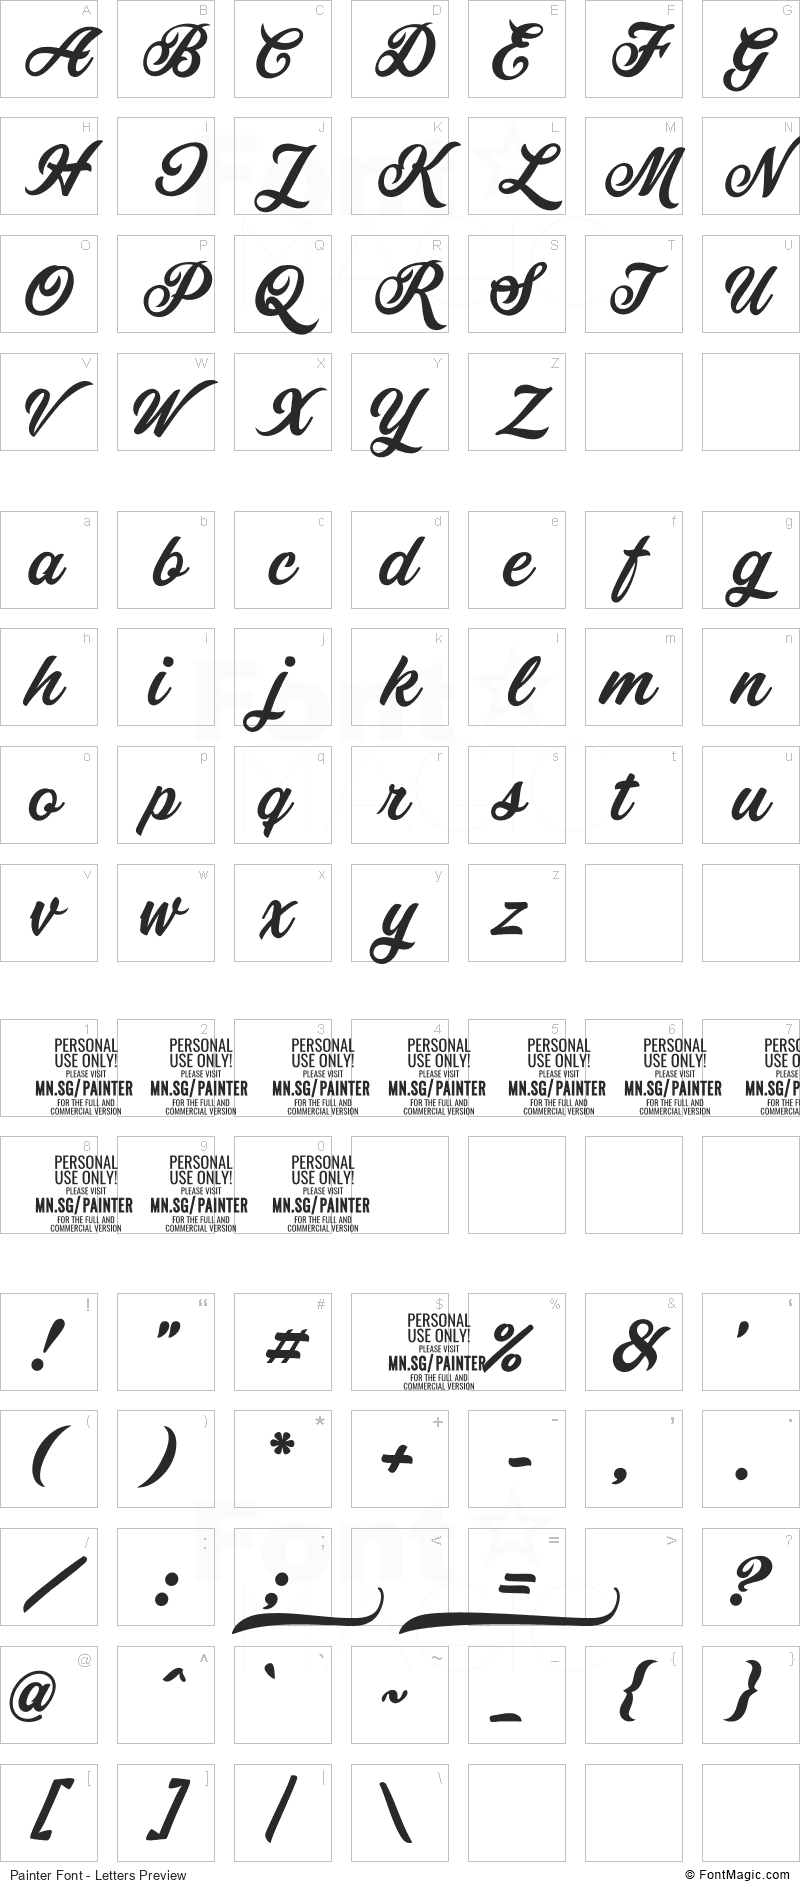 Painter Font - All Latters Preview Chart